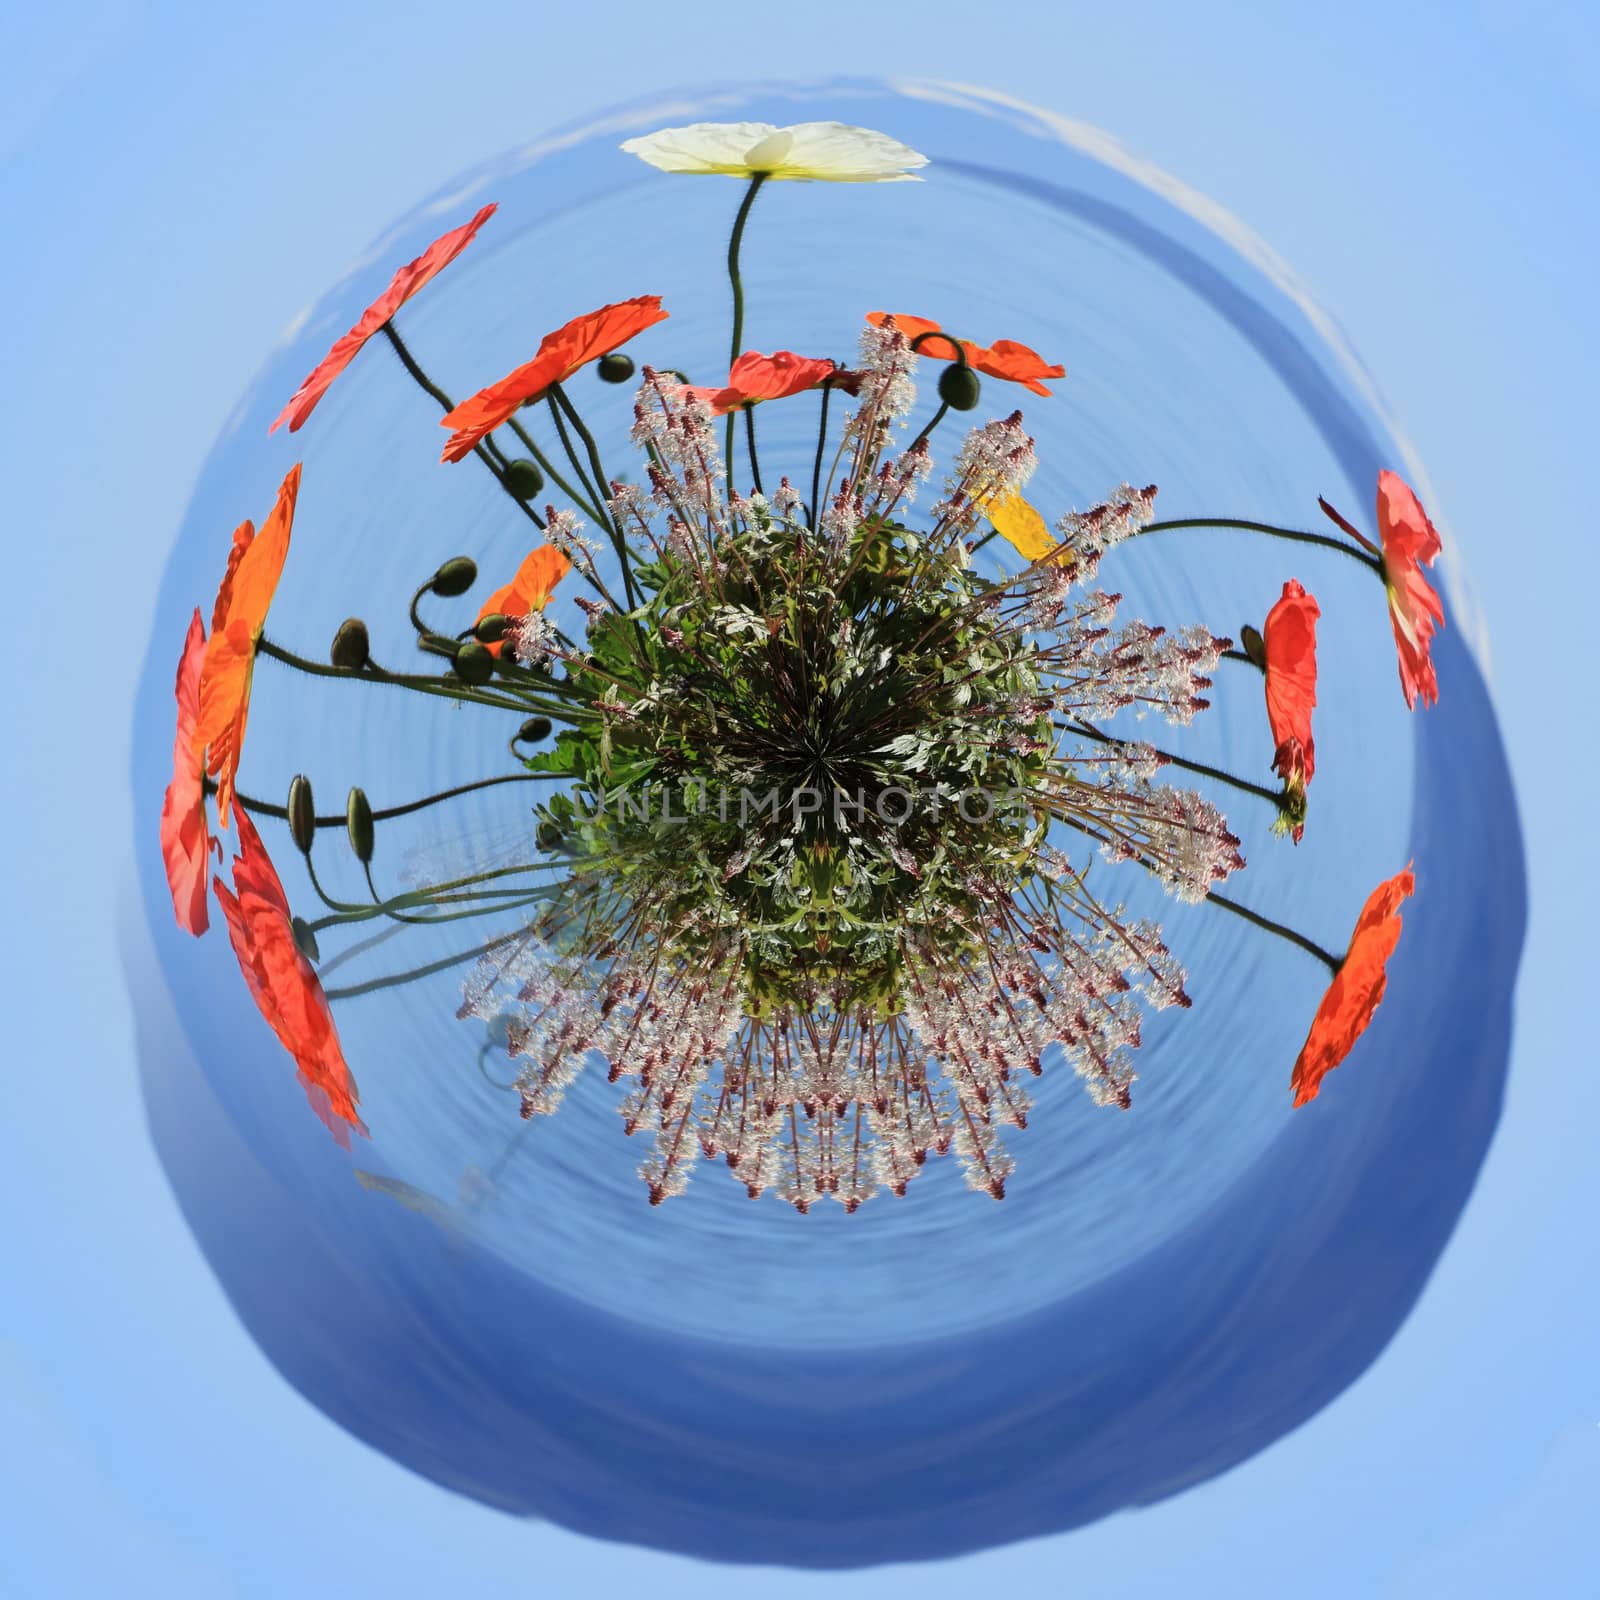 Little planet of colorful springtime flowers at Geneva lake, Montreux, Switzerland. See Alps mountains in the background